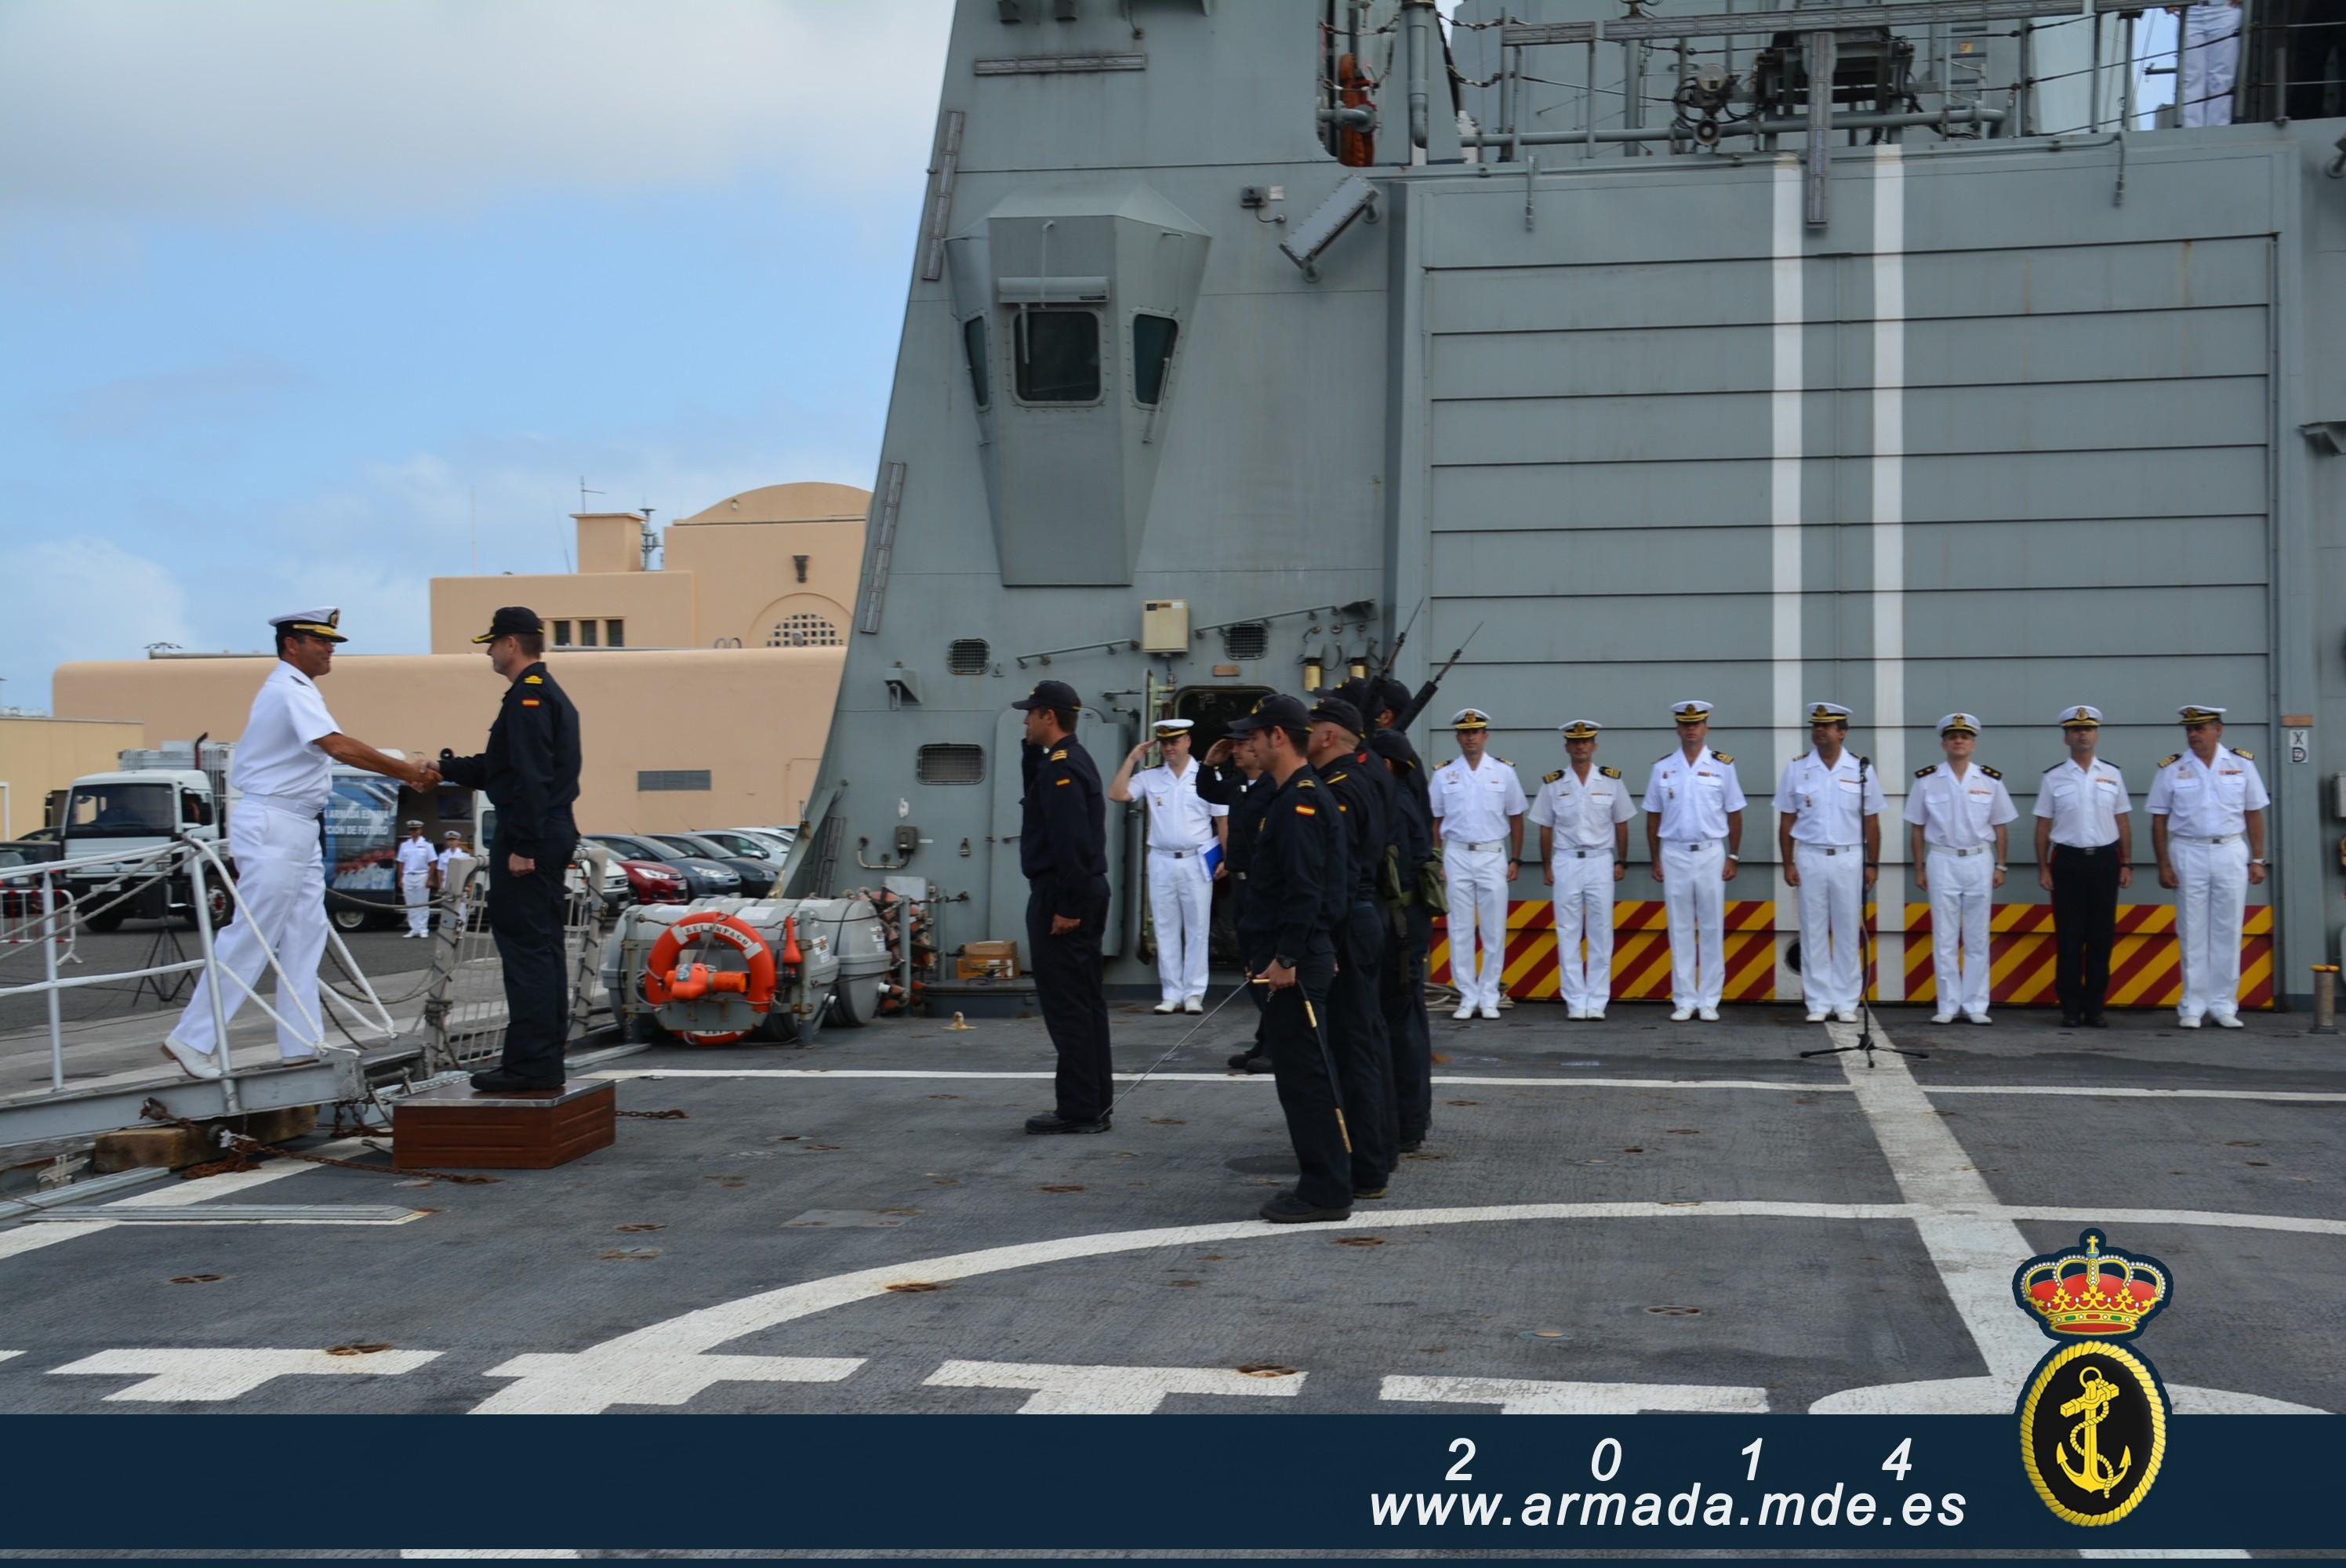 The ship was welcomed by Canary Islands Naval Commander